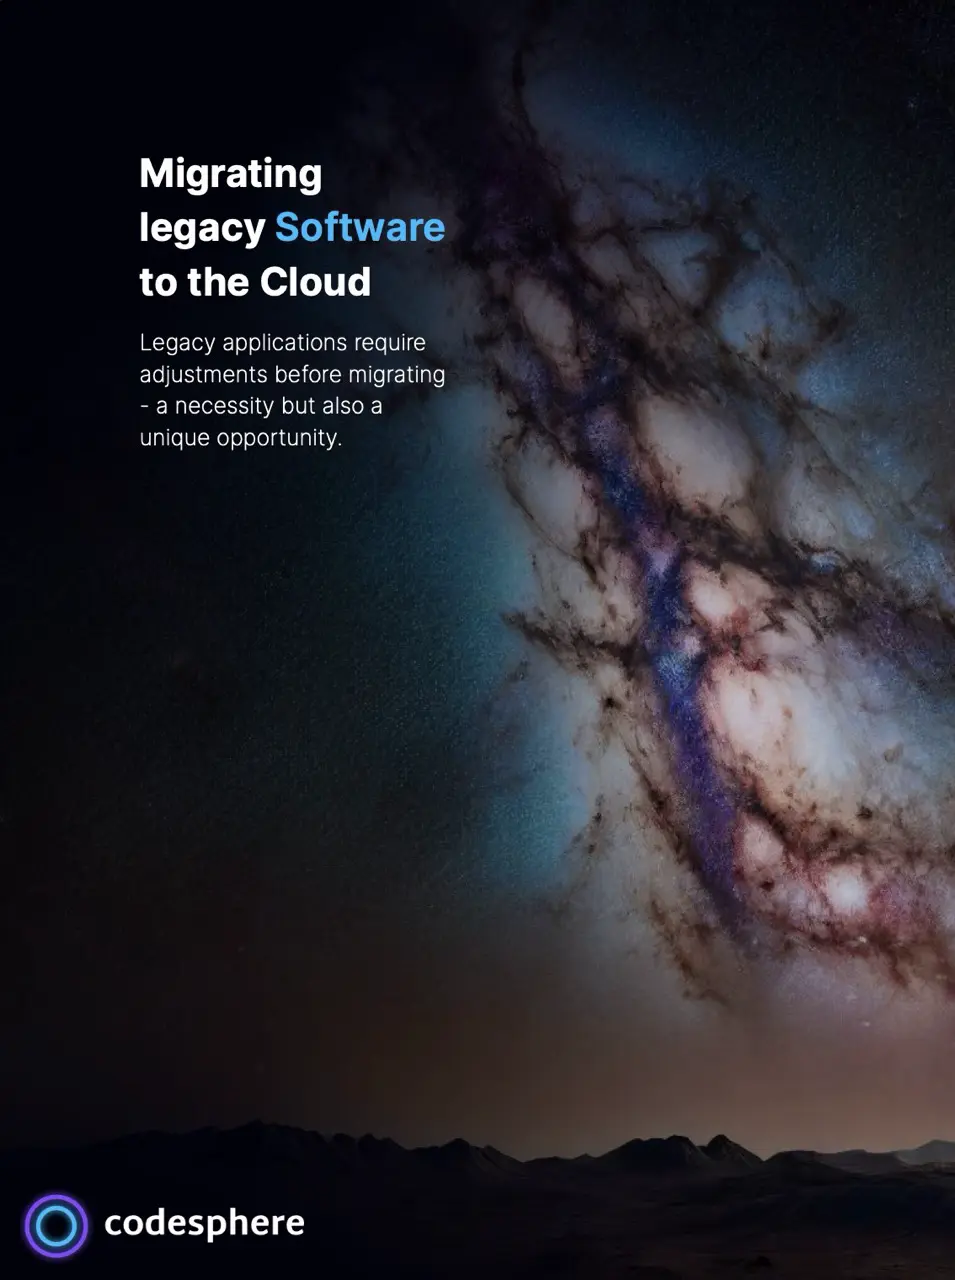 .Migrating legacy software to the cloud